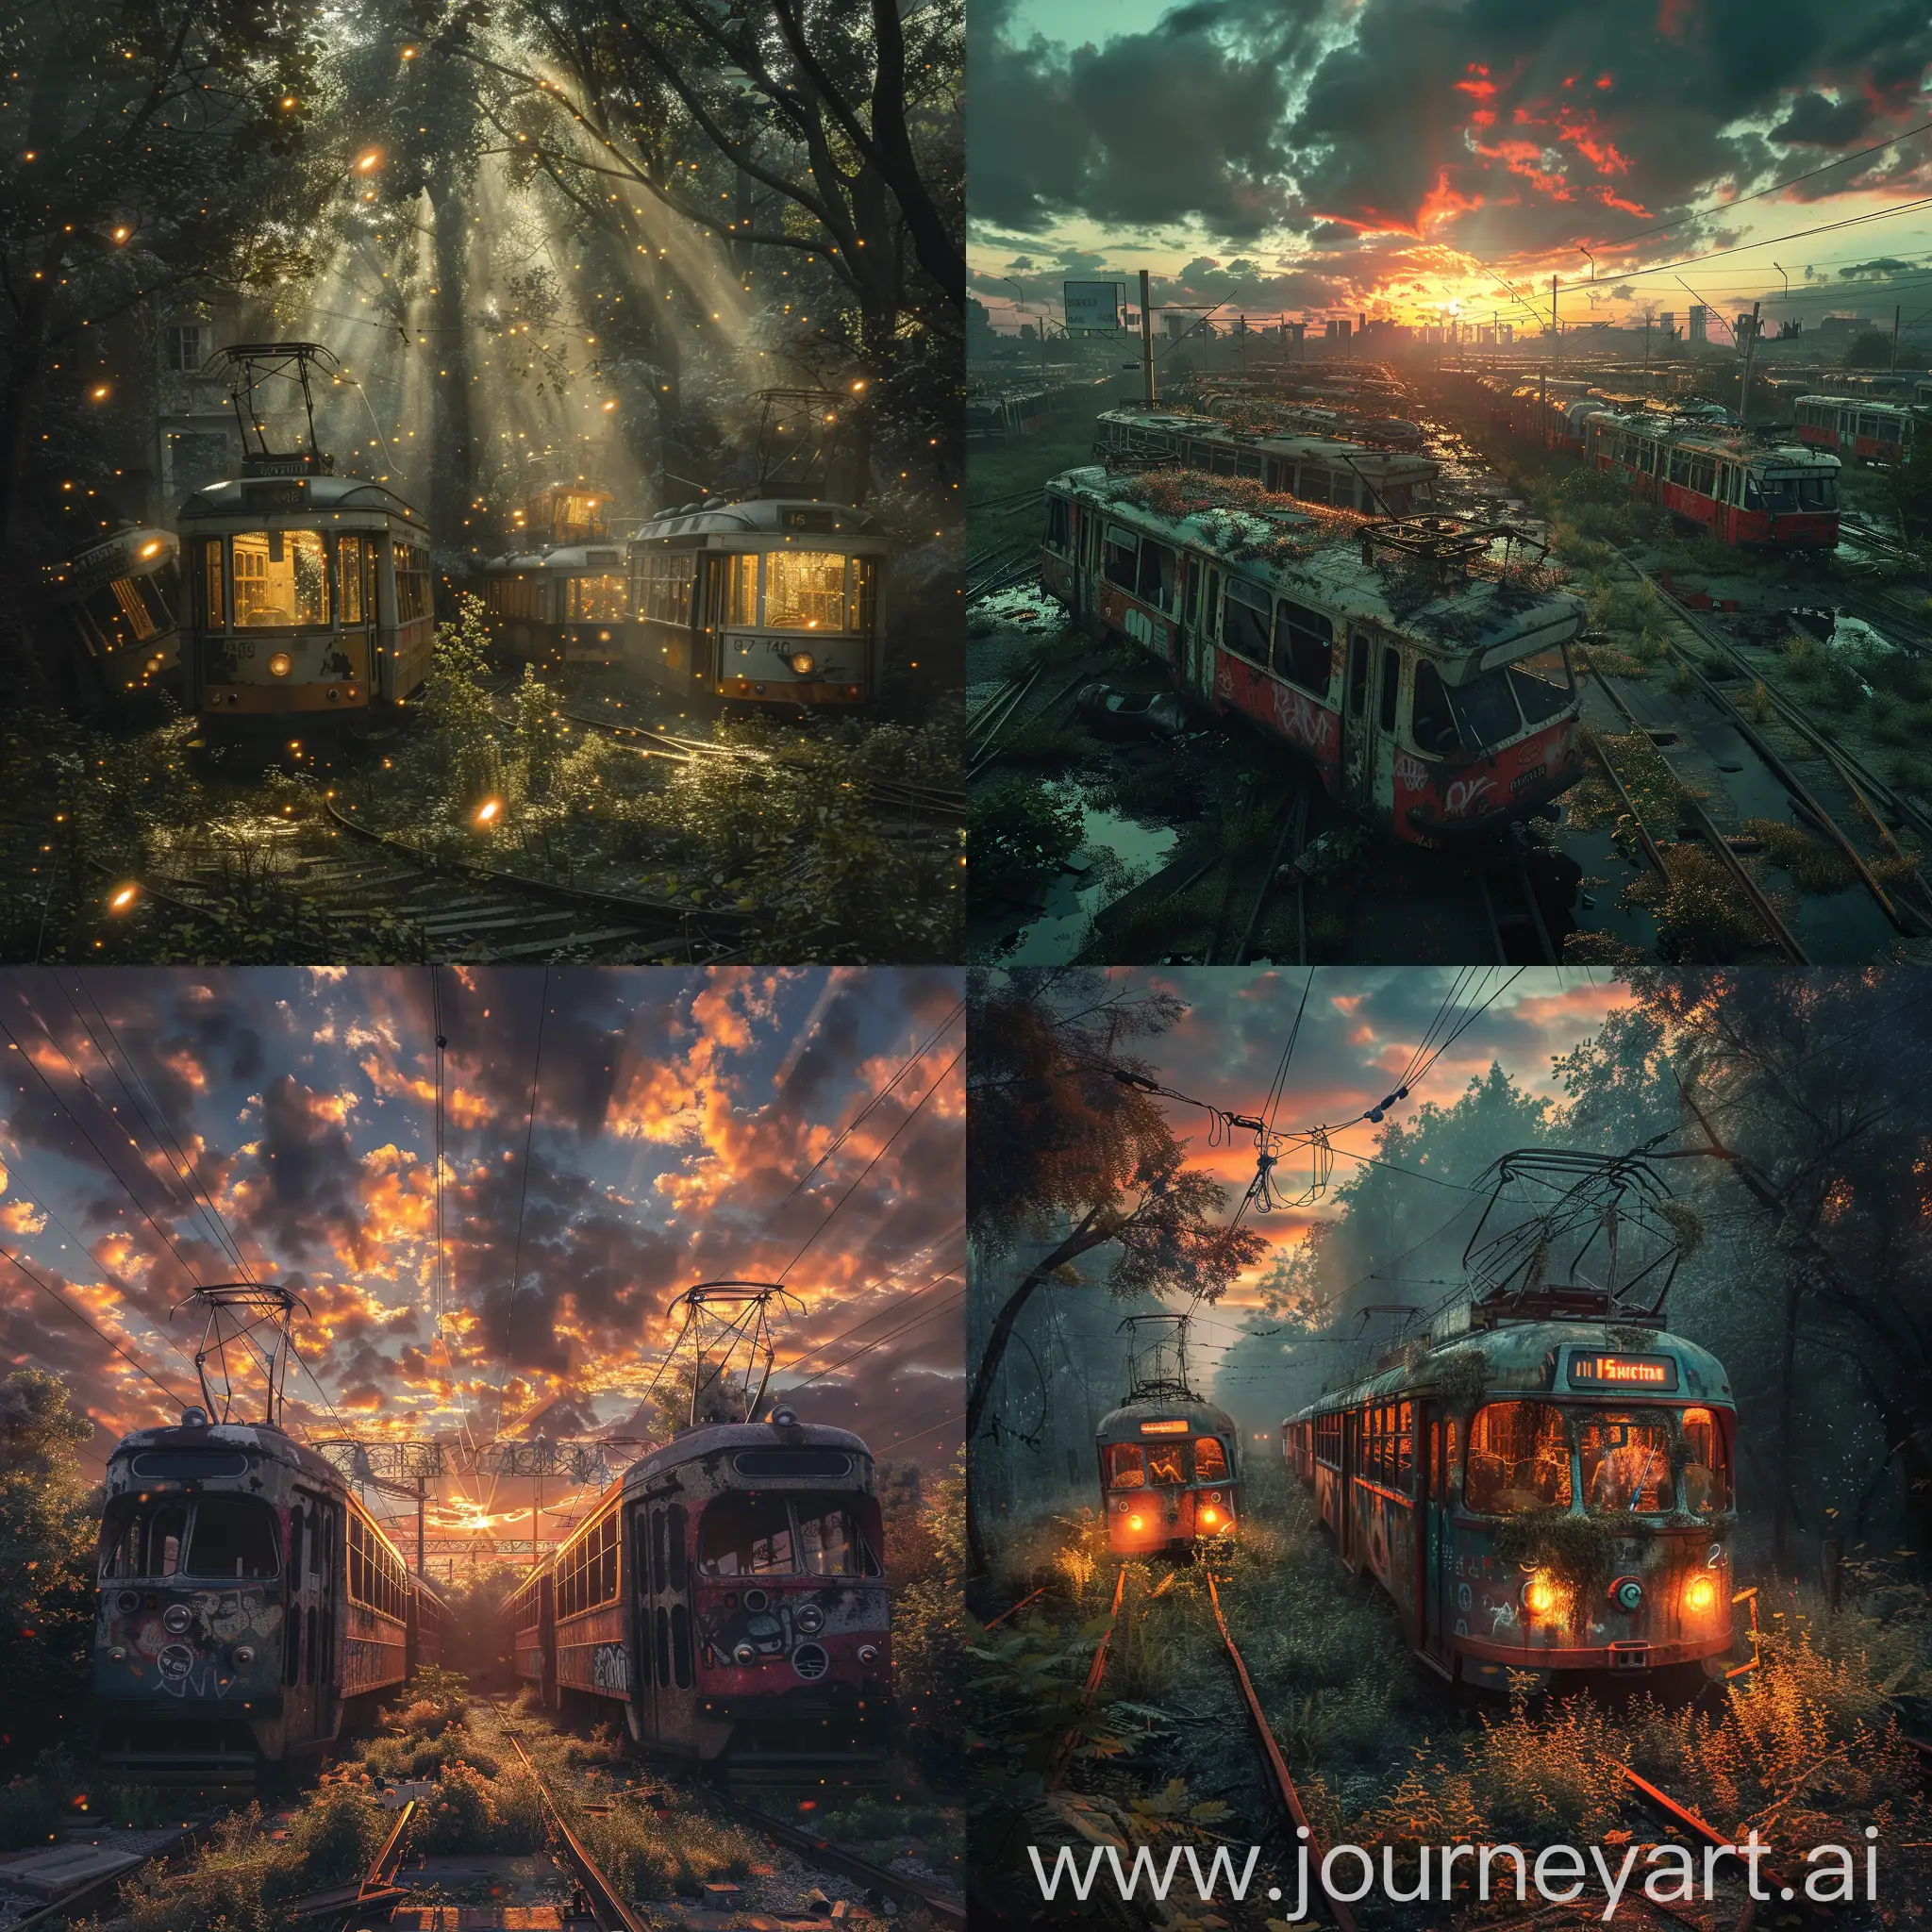 Surreal-Light-Over-Small-Trams-Graveyard